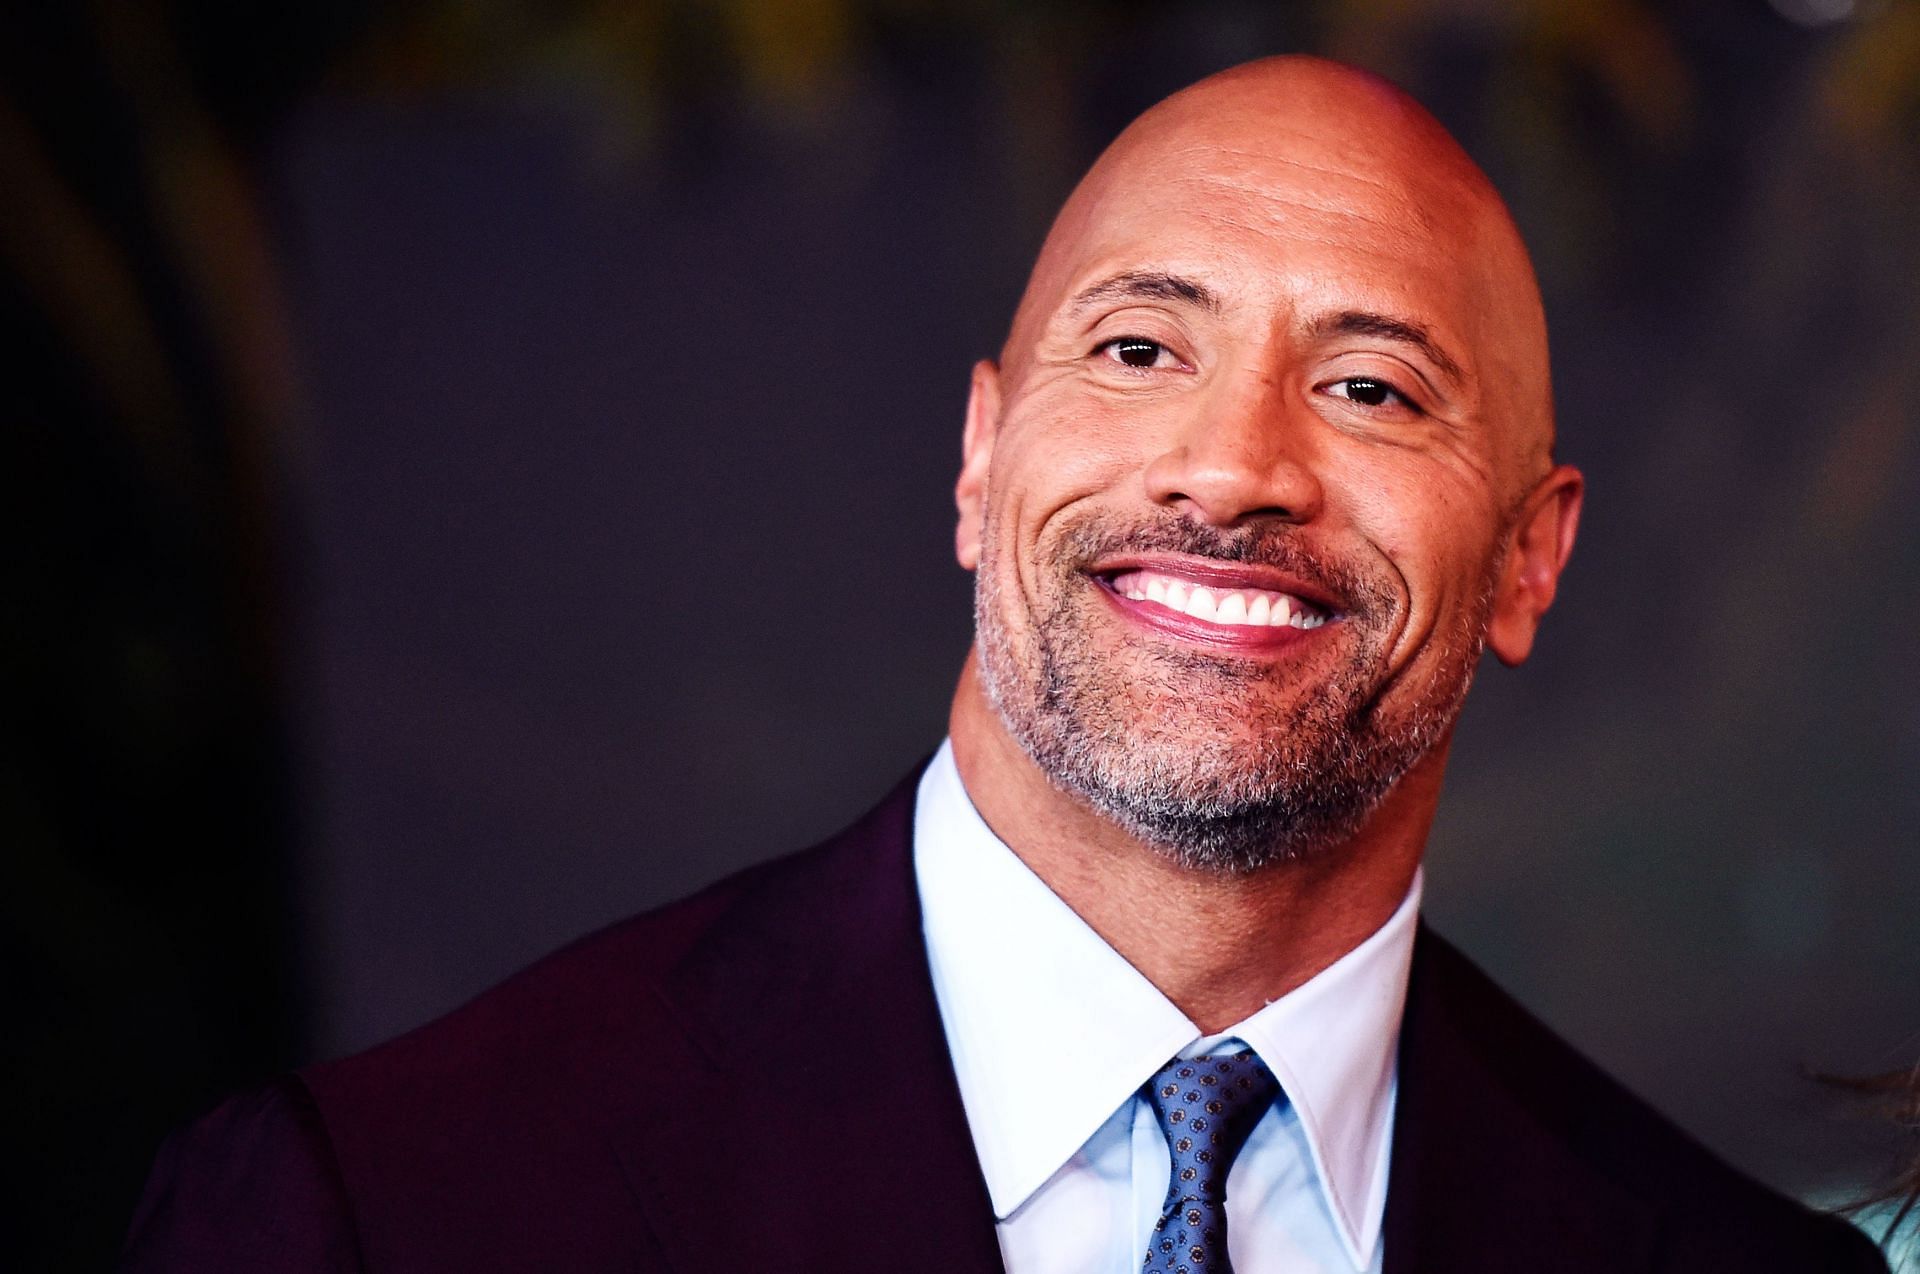 The Rock has just made a major announcement